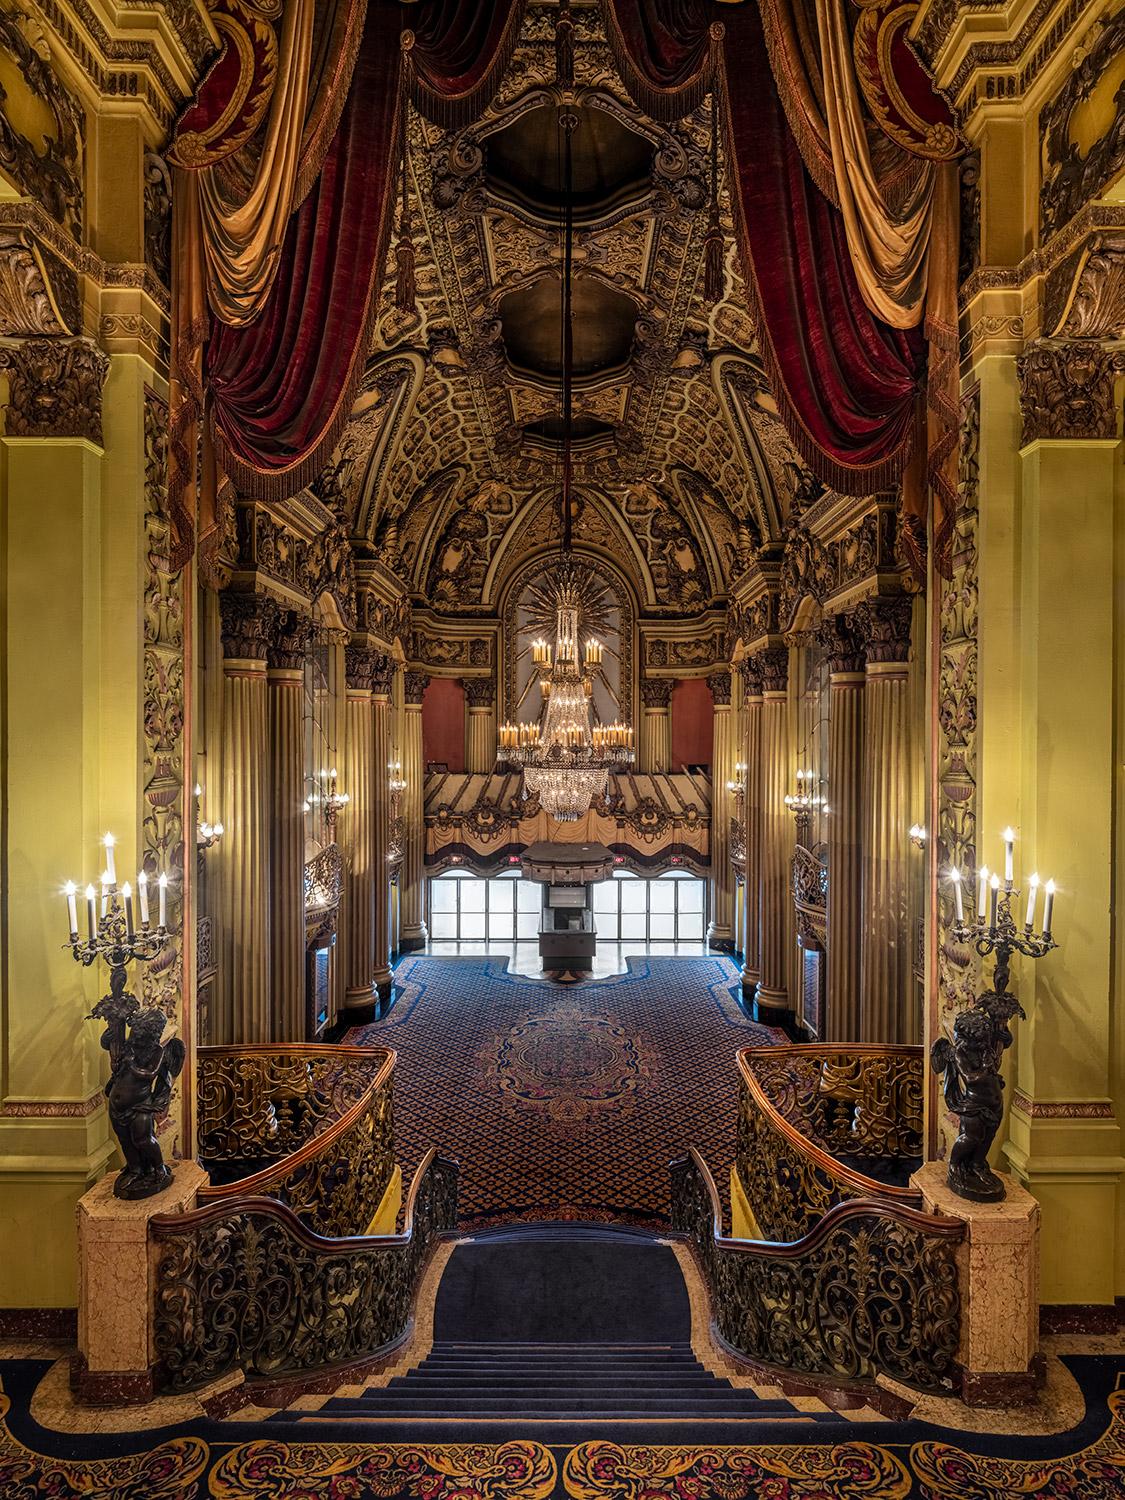 As one of the last opulent picture-palaces built before the Great Depression in 1931, the LA Theatre was erected in less than six months in a French Baroque style and is reminiscent of the Hall of Mirrors in Versailles. The nearly four-story grand